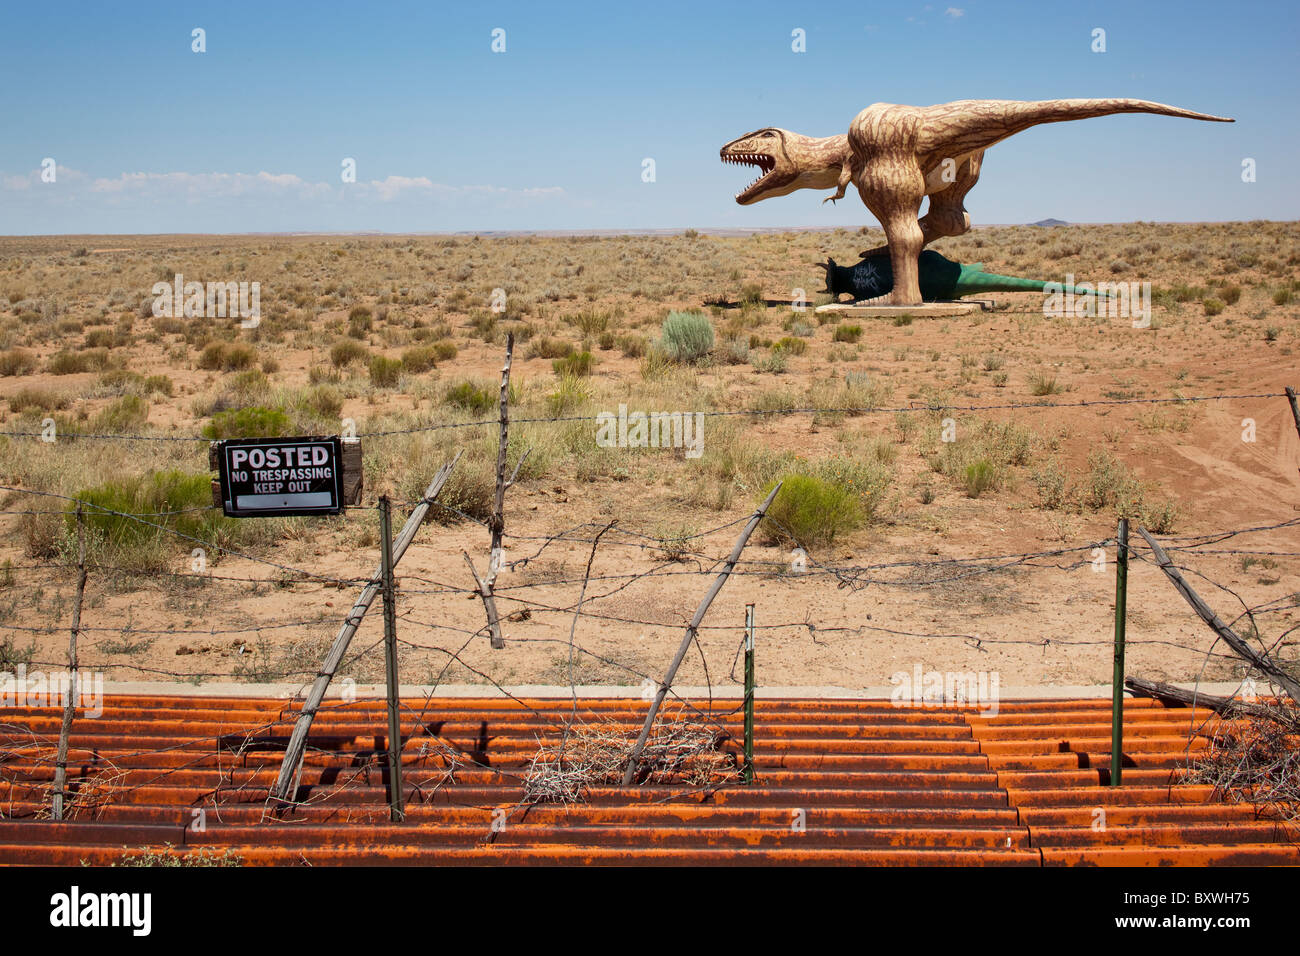 USA, Arizona, Holbrook, Dinosaur sculptures in desert along Route 66 with No Trespassing sign and road cattle guard Stock Photo